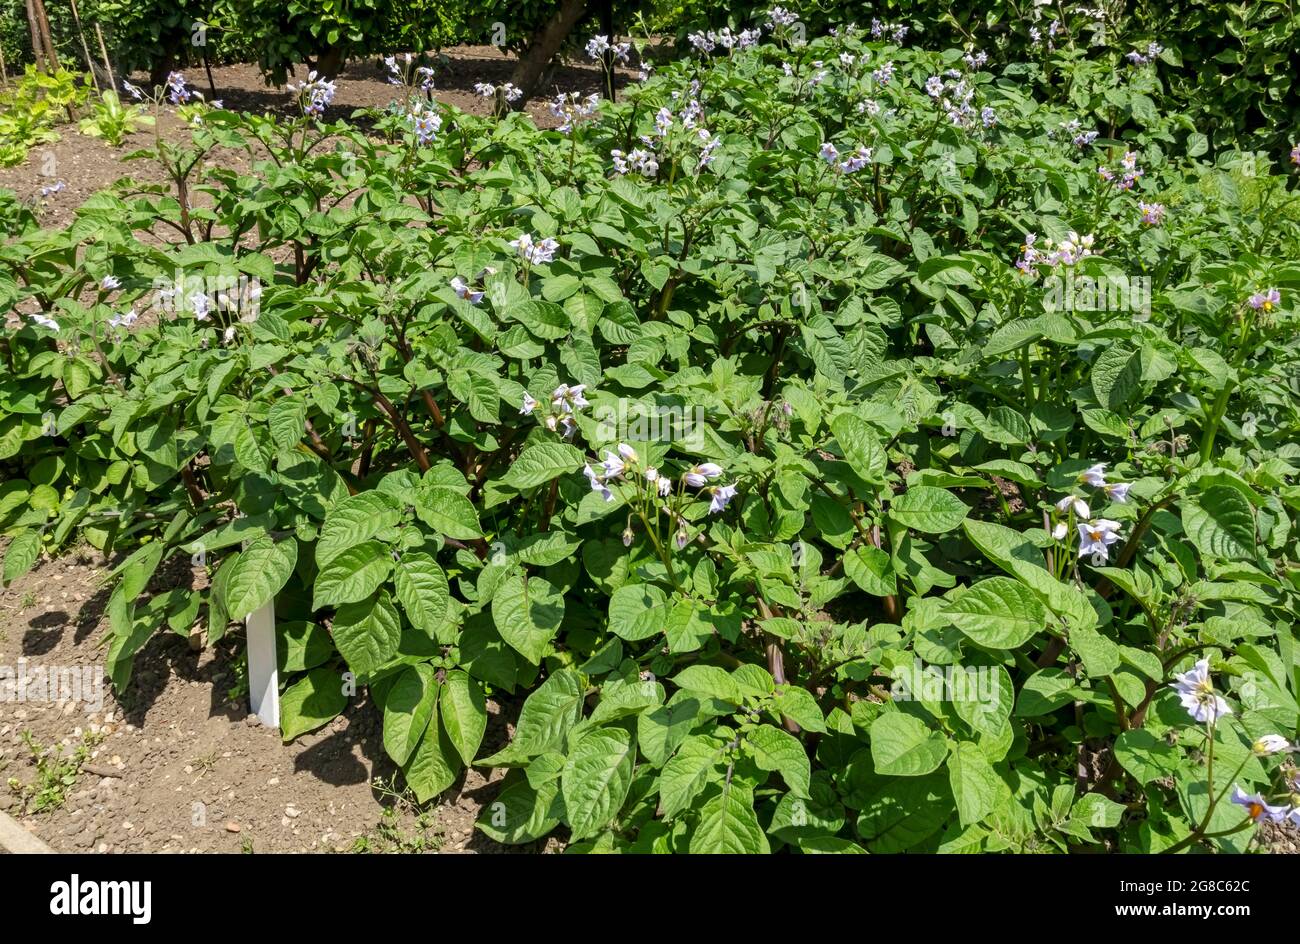 Potato plant plants potatoes growing in the allotment vegetable garden in summer England UK United Kingdom GB Great Britain Stock Photo